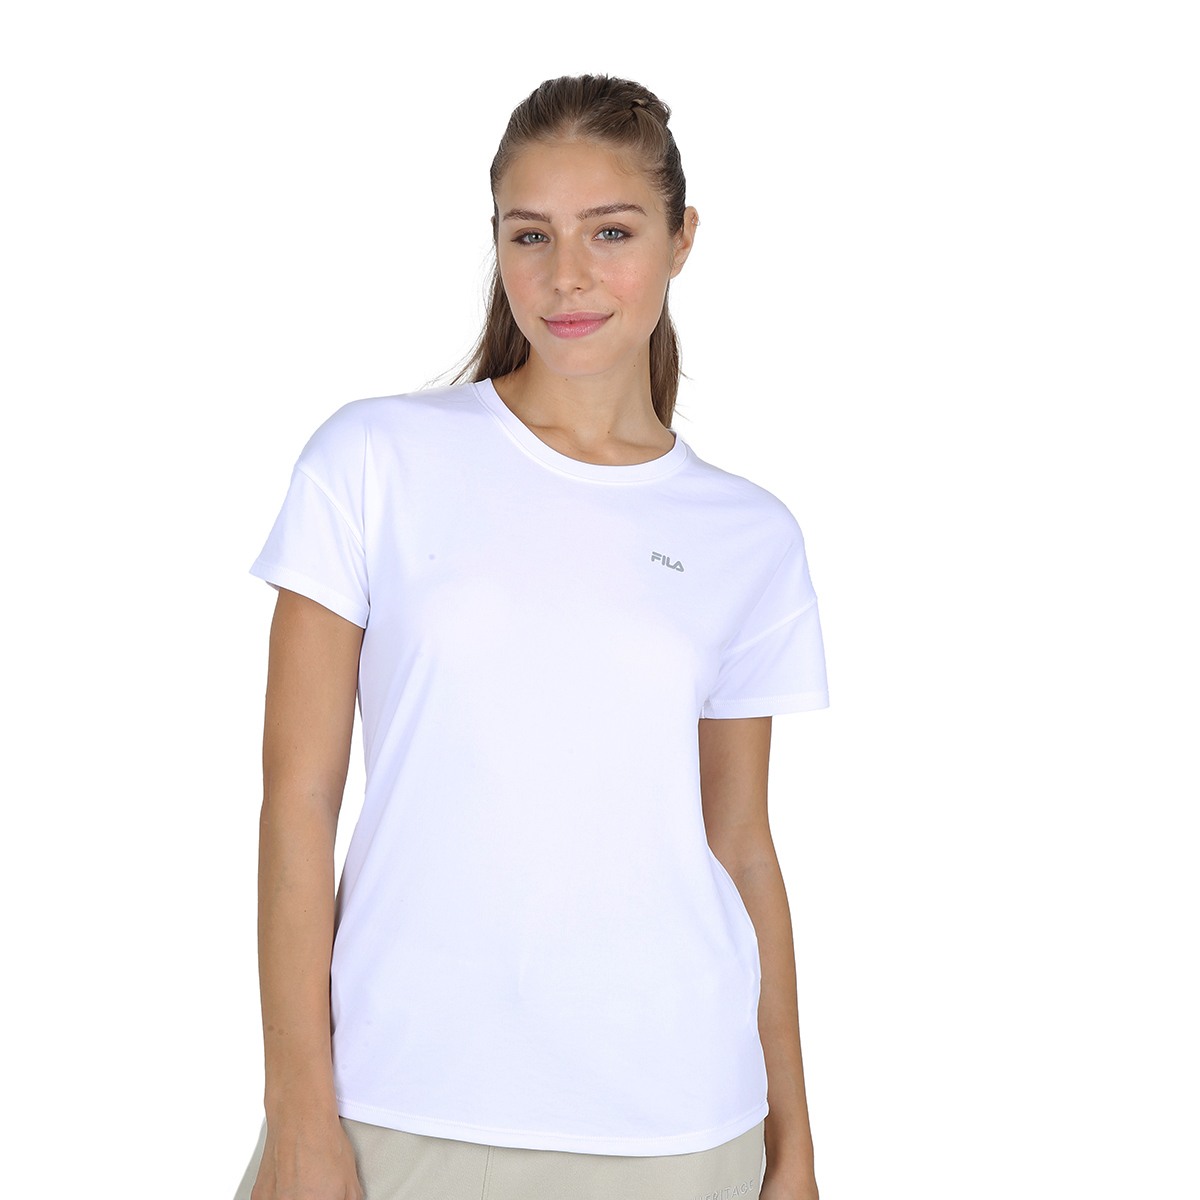 Remera Entrenamiento Fila Classic Mujer,  image number null